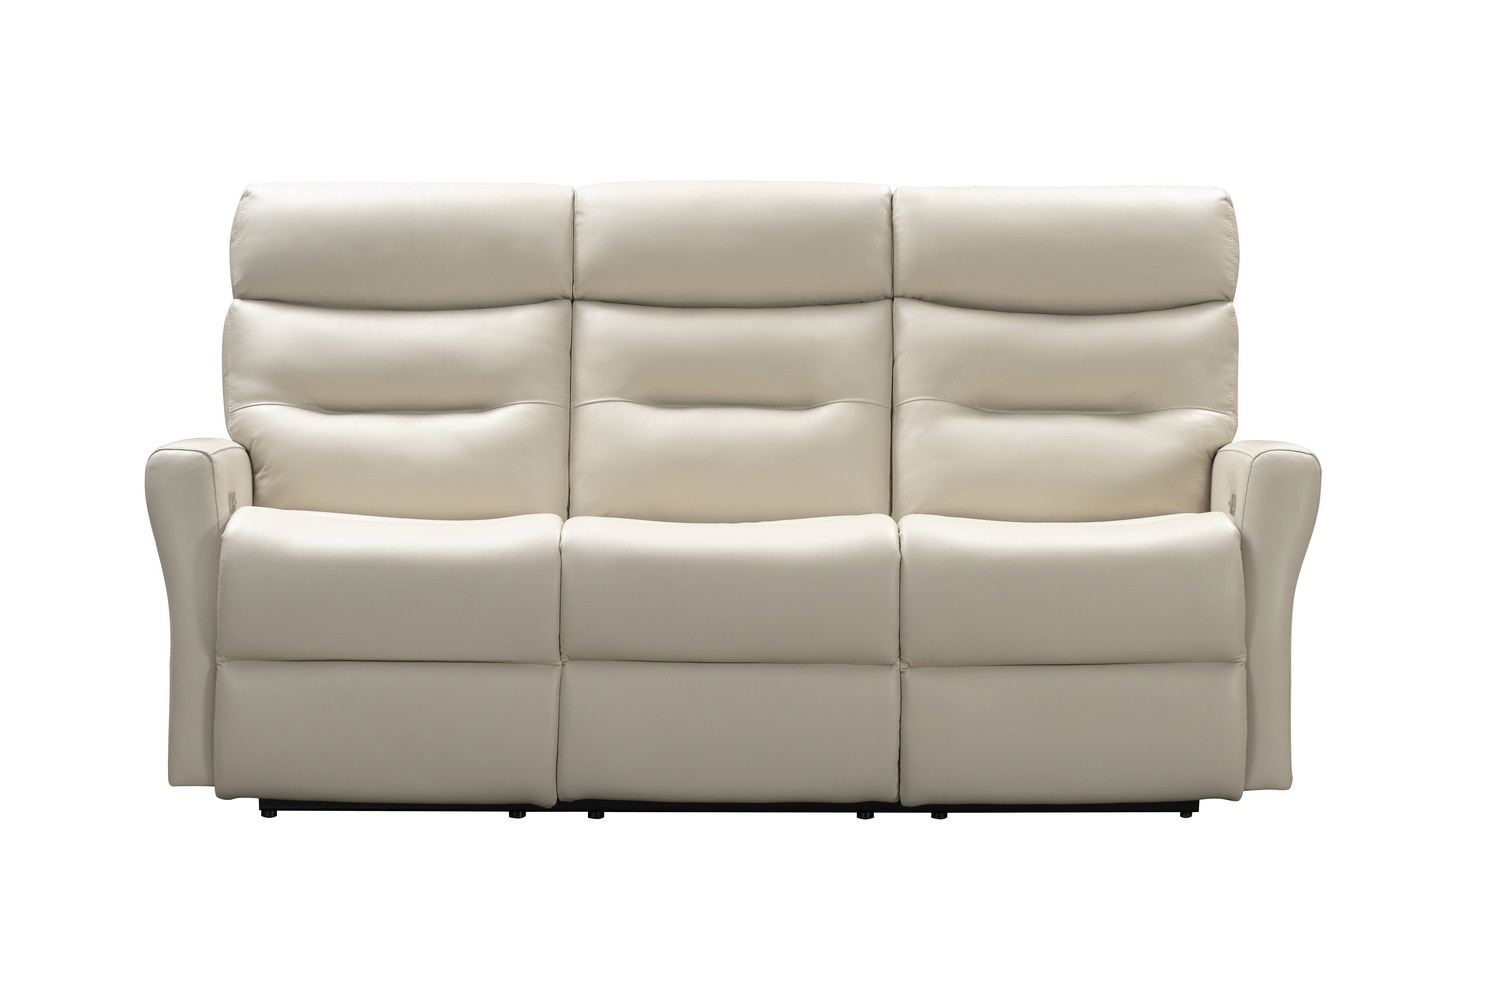 Barcalounger Enzo Power Reclining Sofa with Power Head Rests and Power Lumbar - Laurel Cream/Leather Match